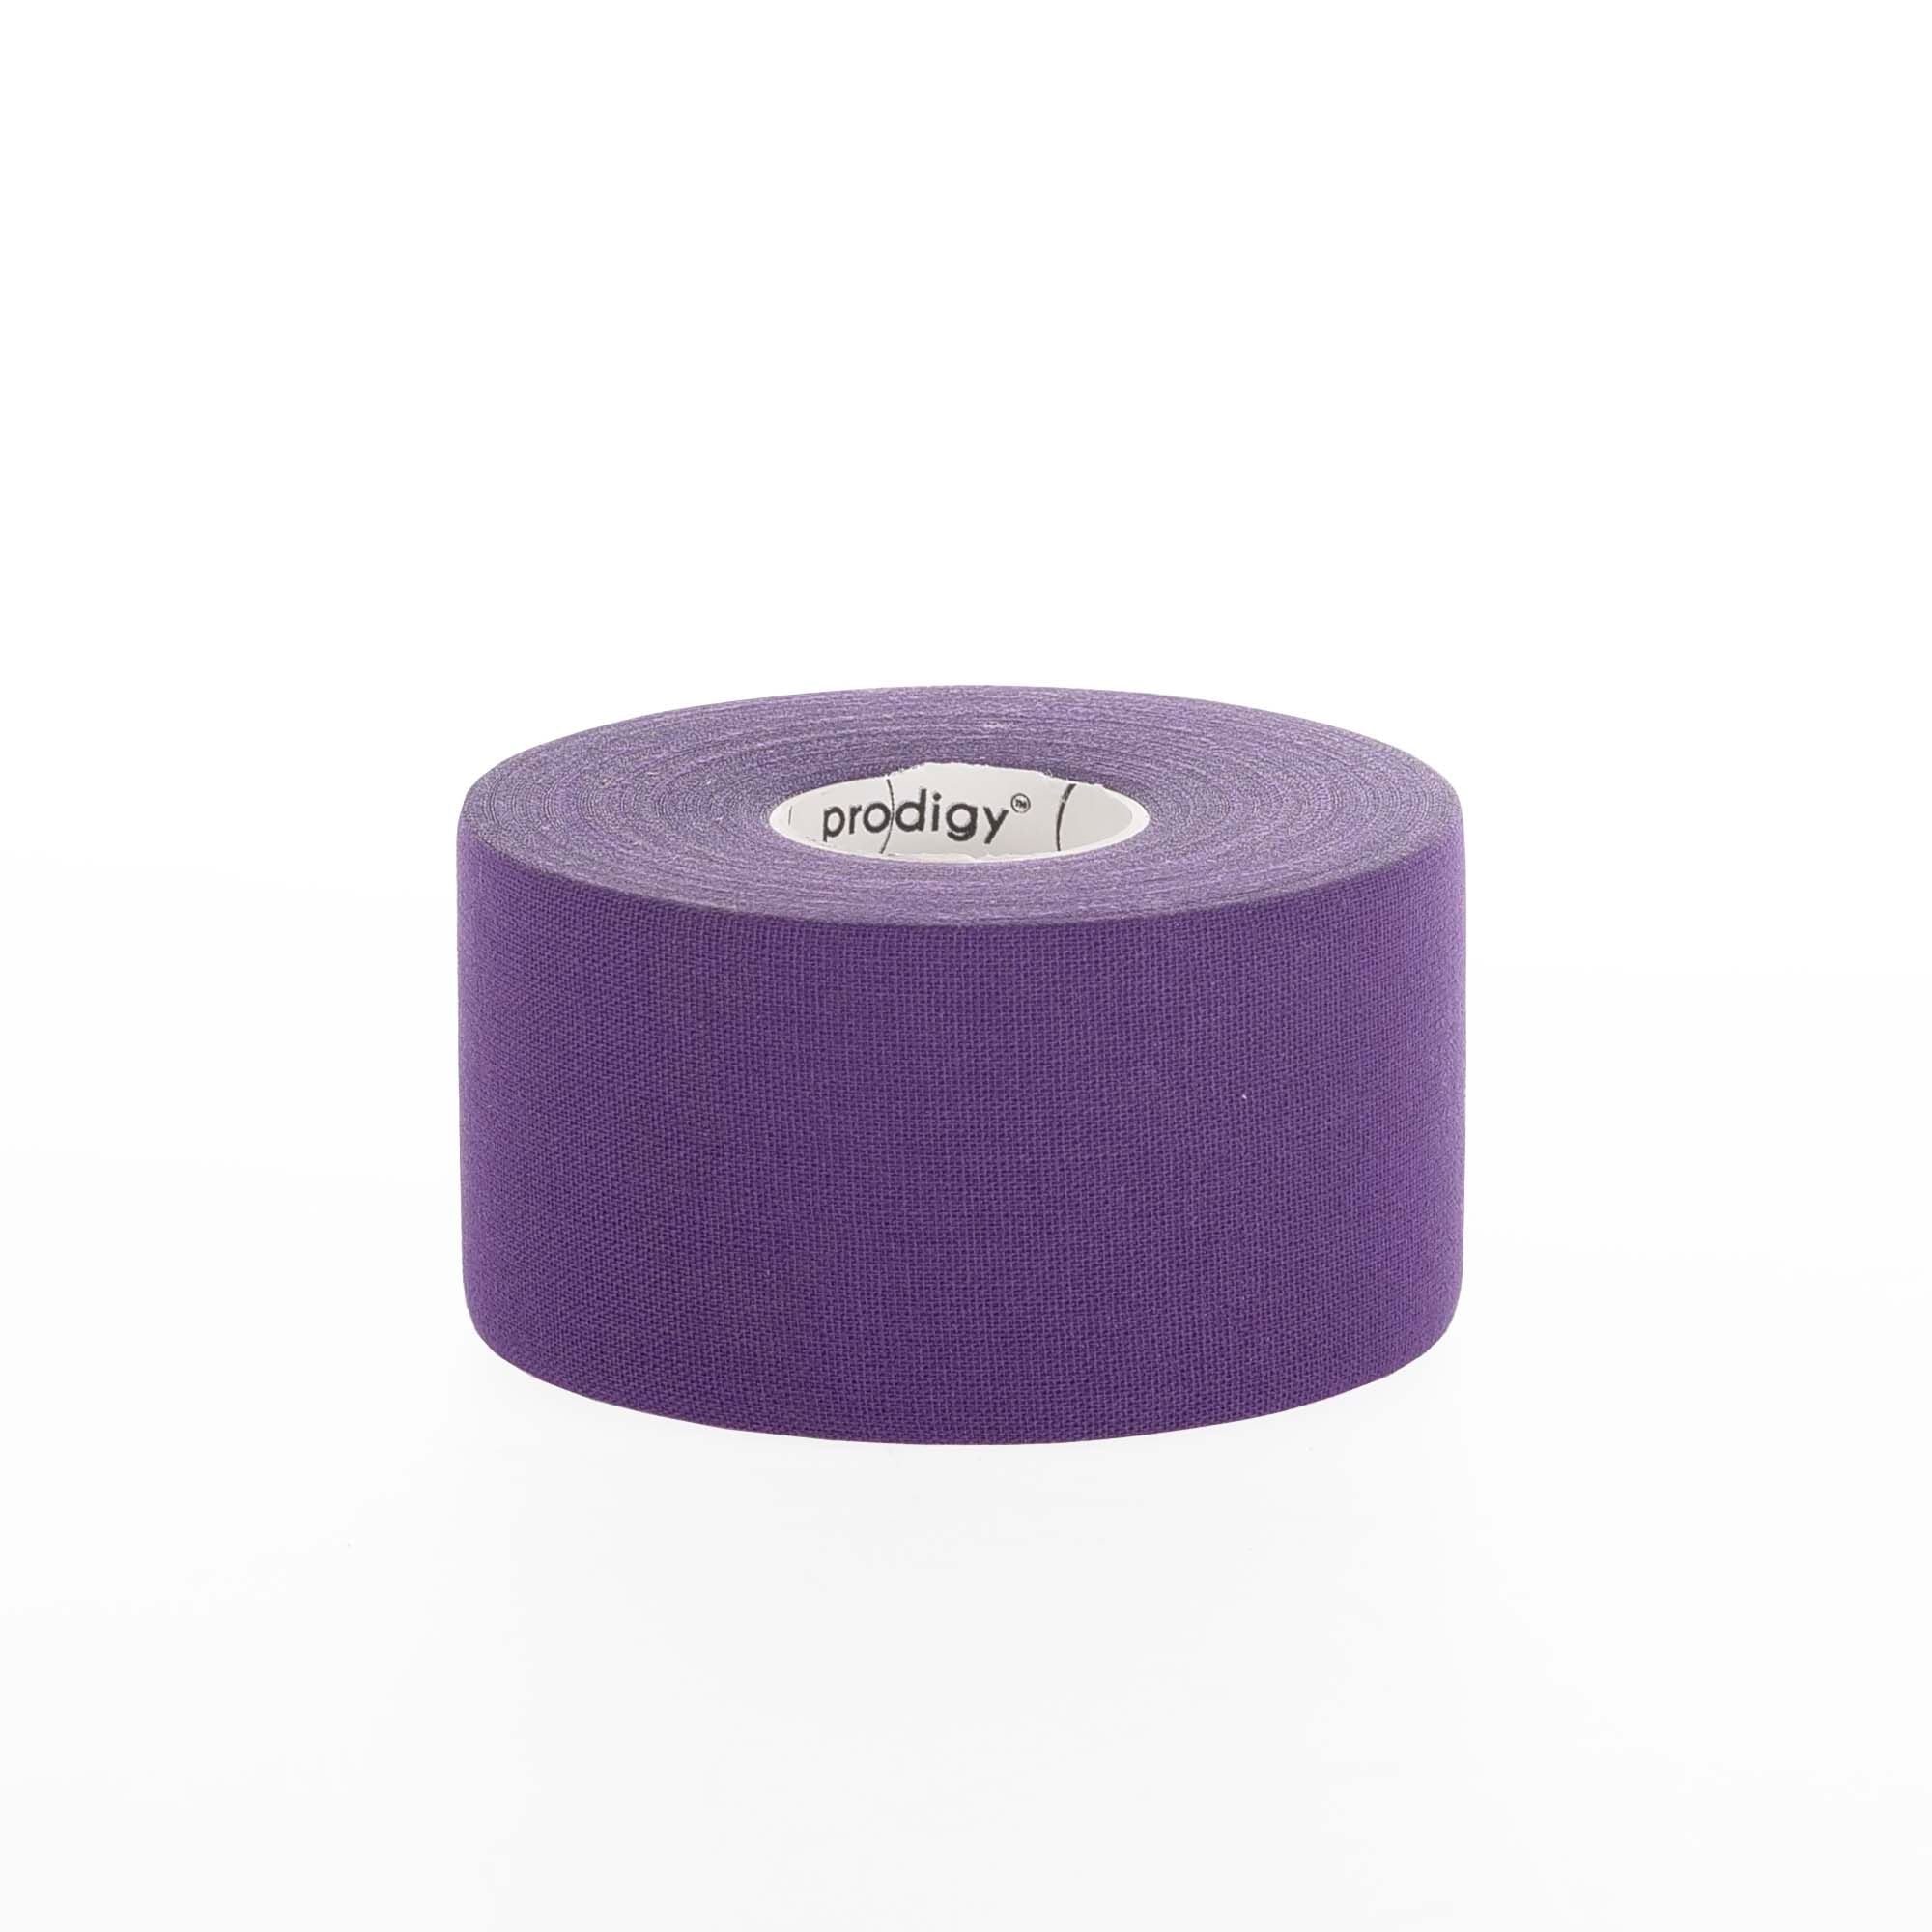 Prodigy snake tape laying down in purple